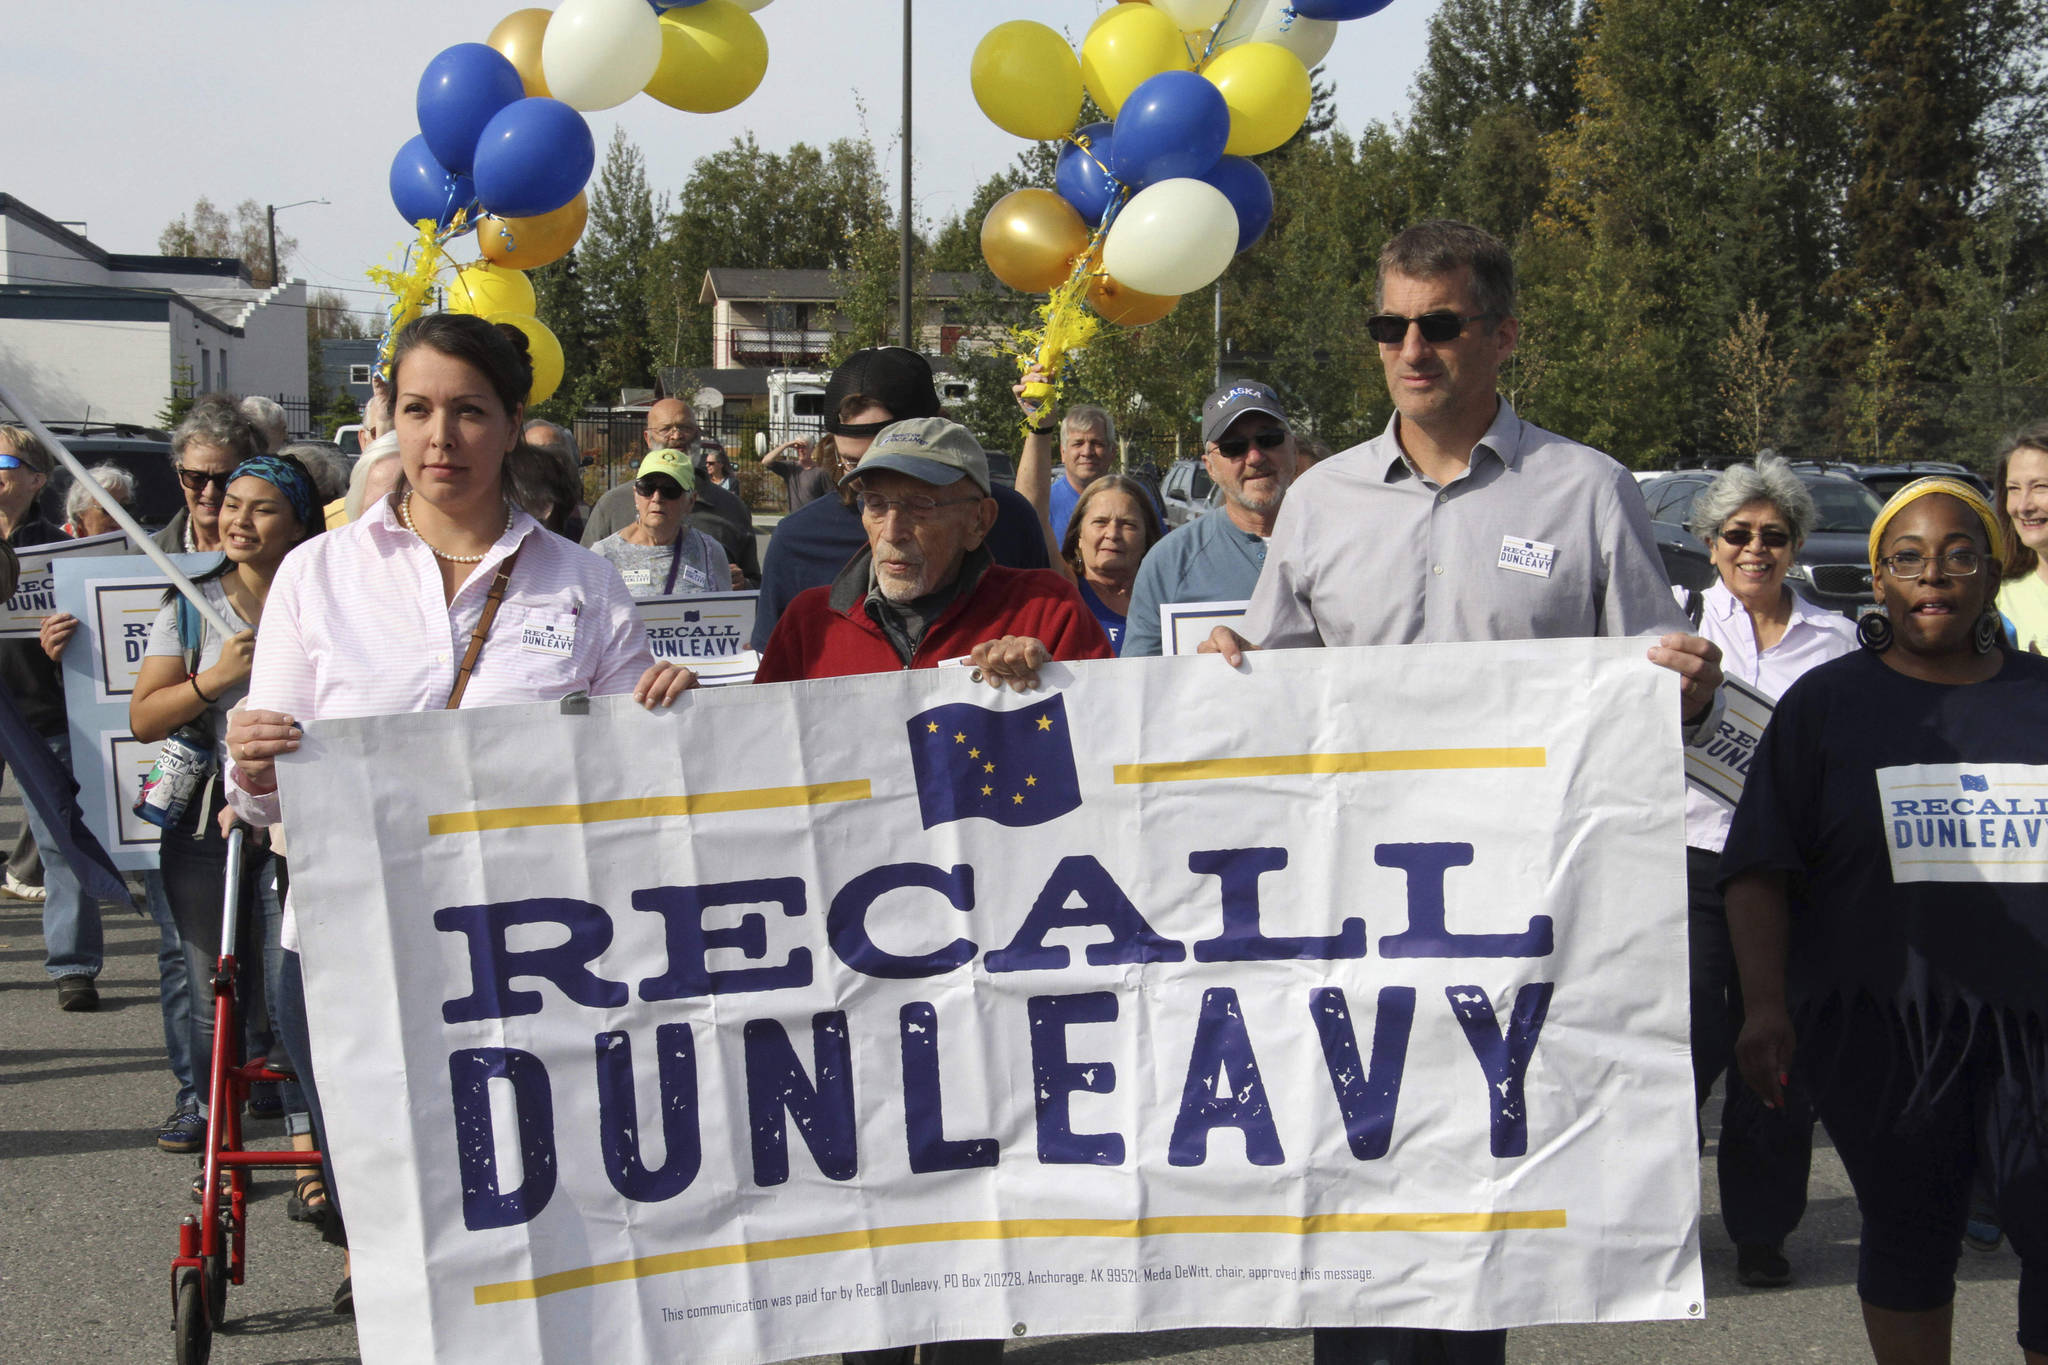 In this Sept. 5 file photo, Meda DeWitt, left, Vic Fischer, middle, and Aaron Welterlen, leaders of an effort to recall Gov. Mike Dunleavy, lead about 50 volunteers in a march to the Alaska Division of Elections office in Anchorage. The Alaska Supreme Court on Friday agreed to allow a group seeking to recall Gov. Mike Dunleavy to begin a second signature-gathering phase. (AP Photo | Mark Thiessen)